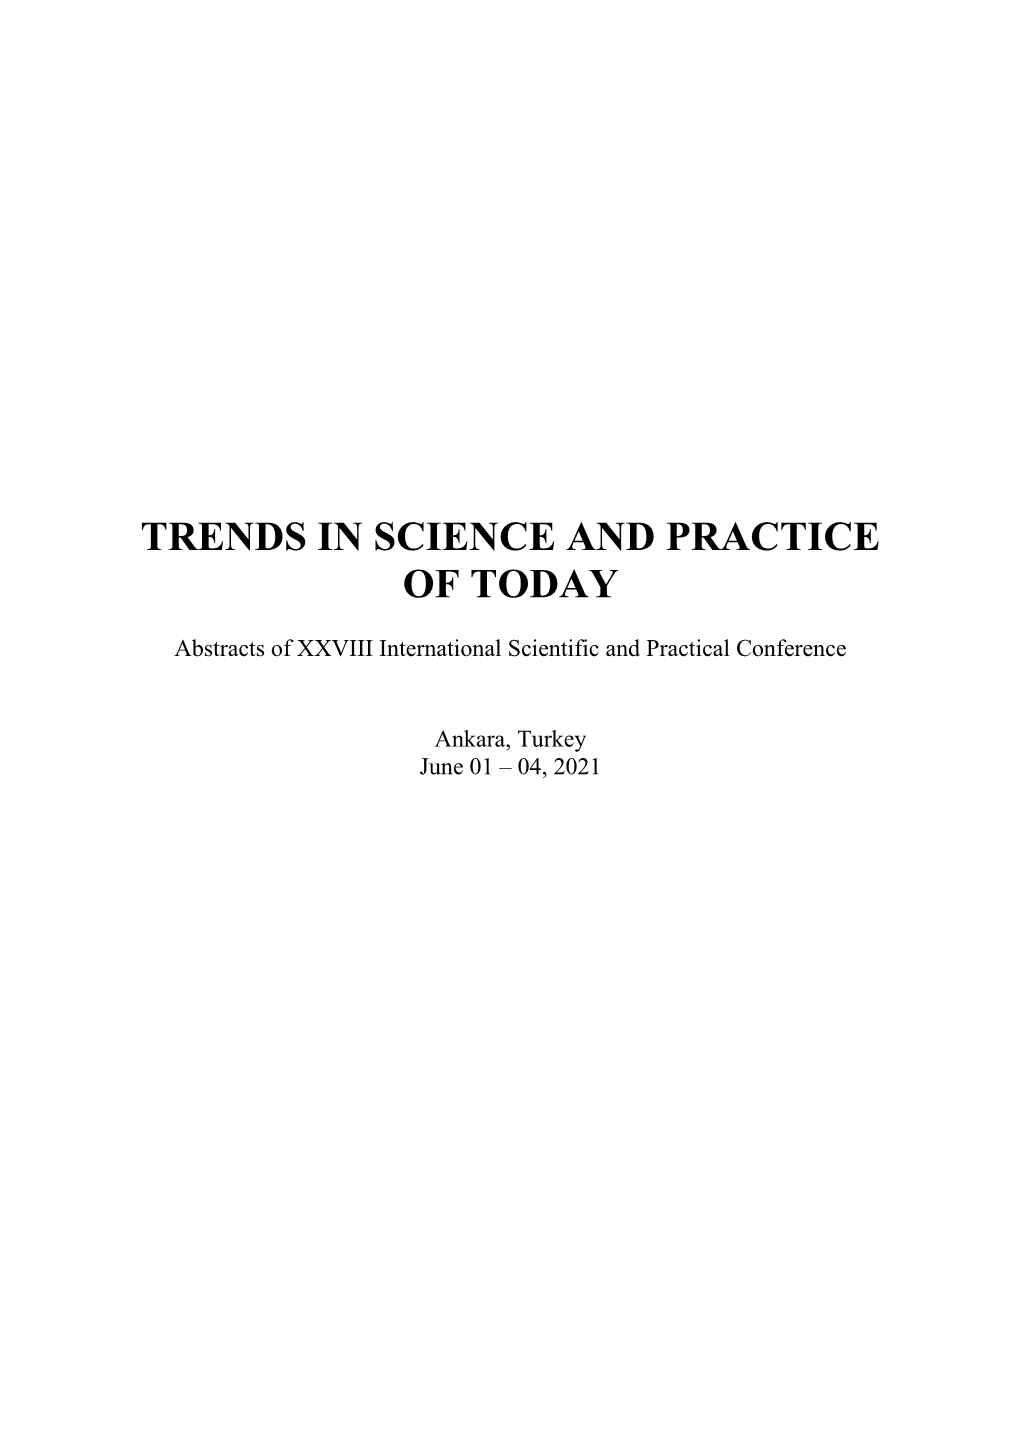 Trends in Science and Practice of Today